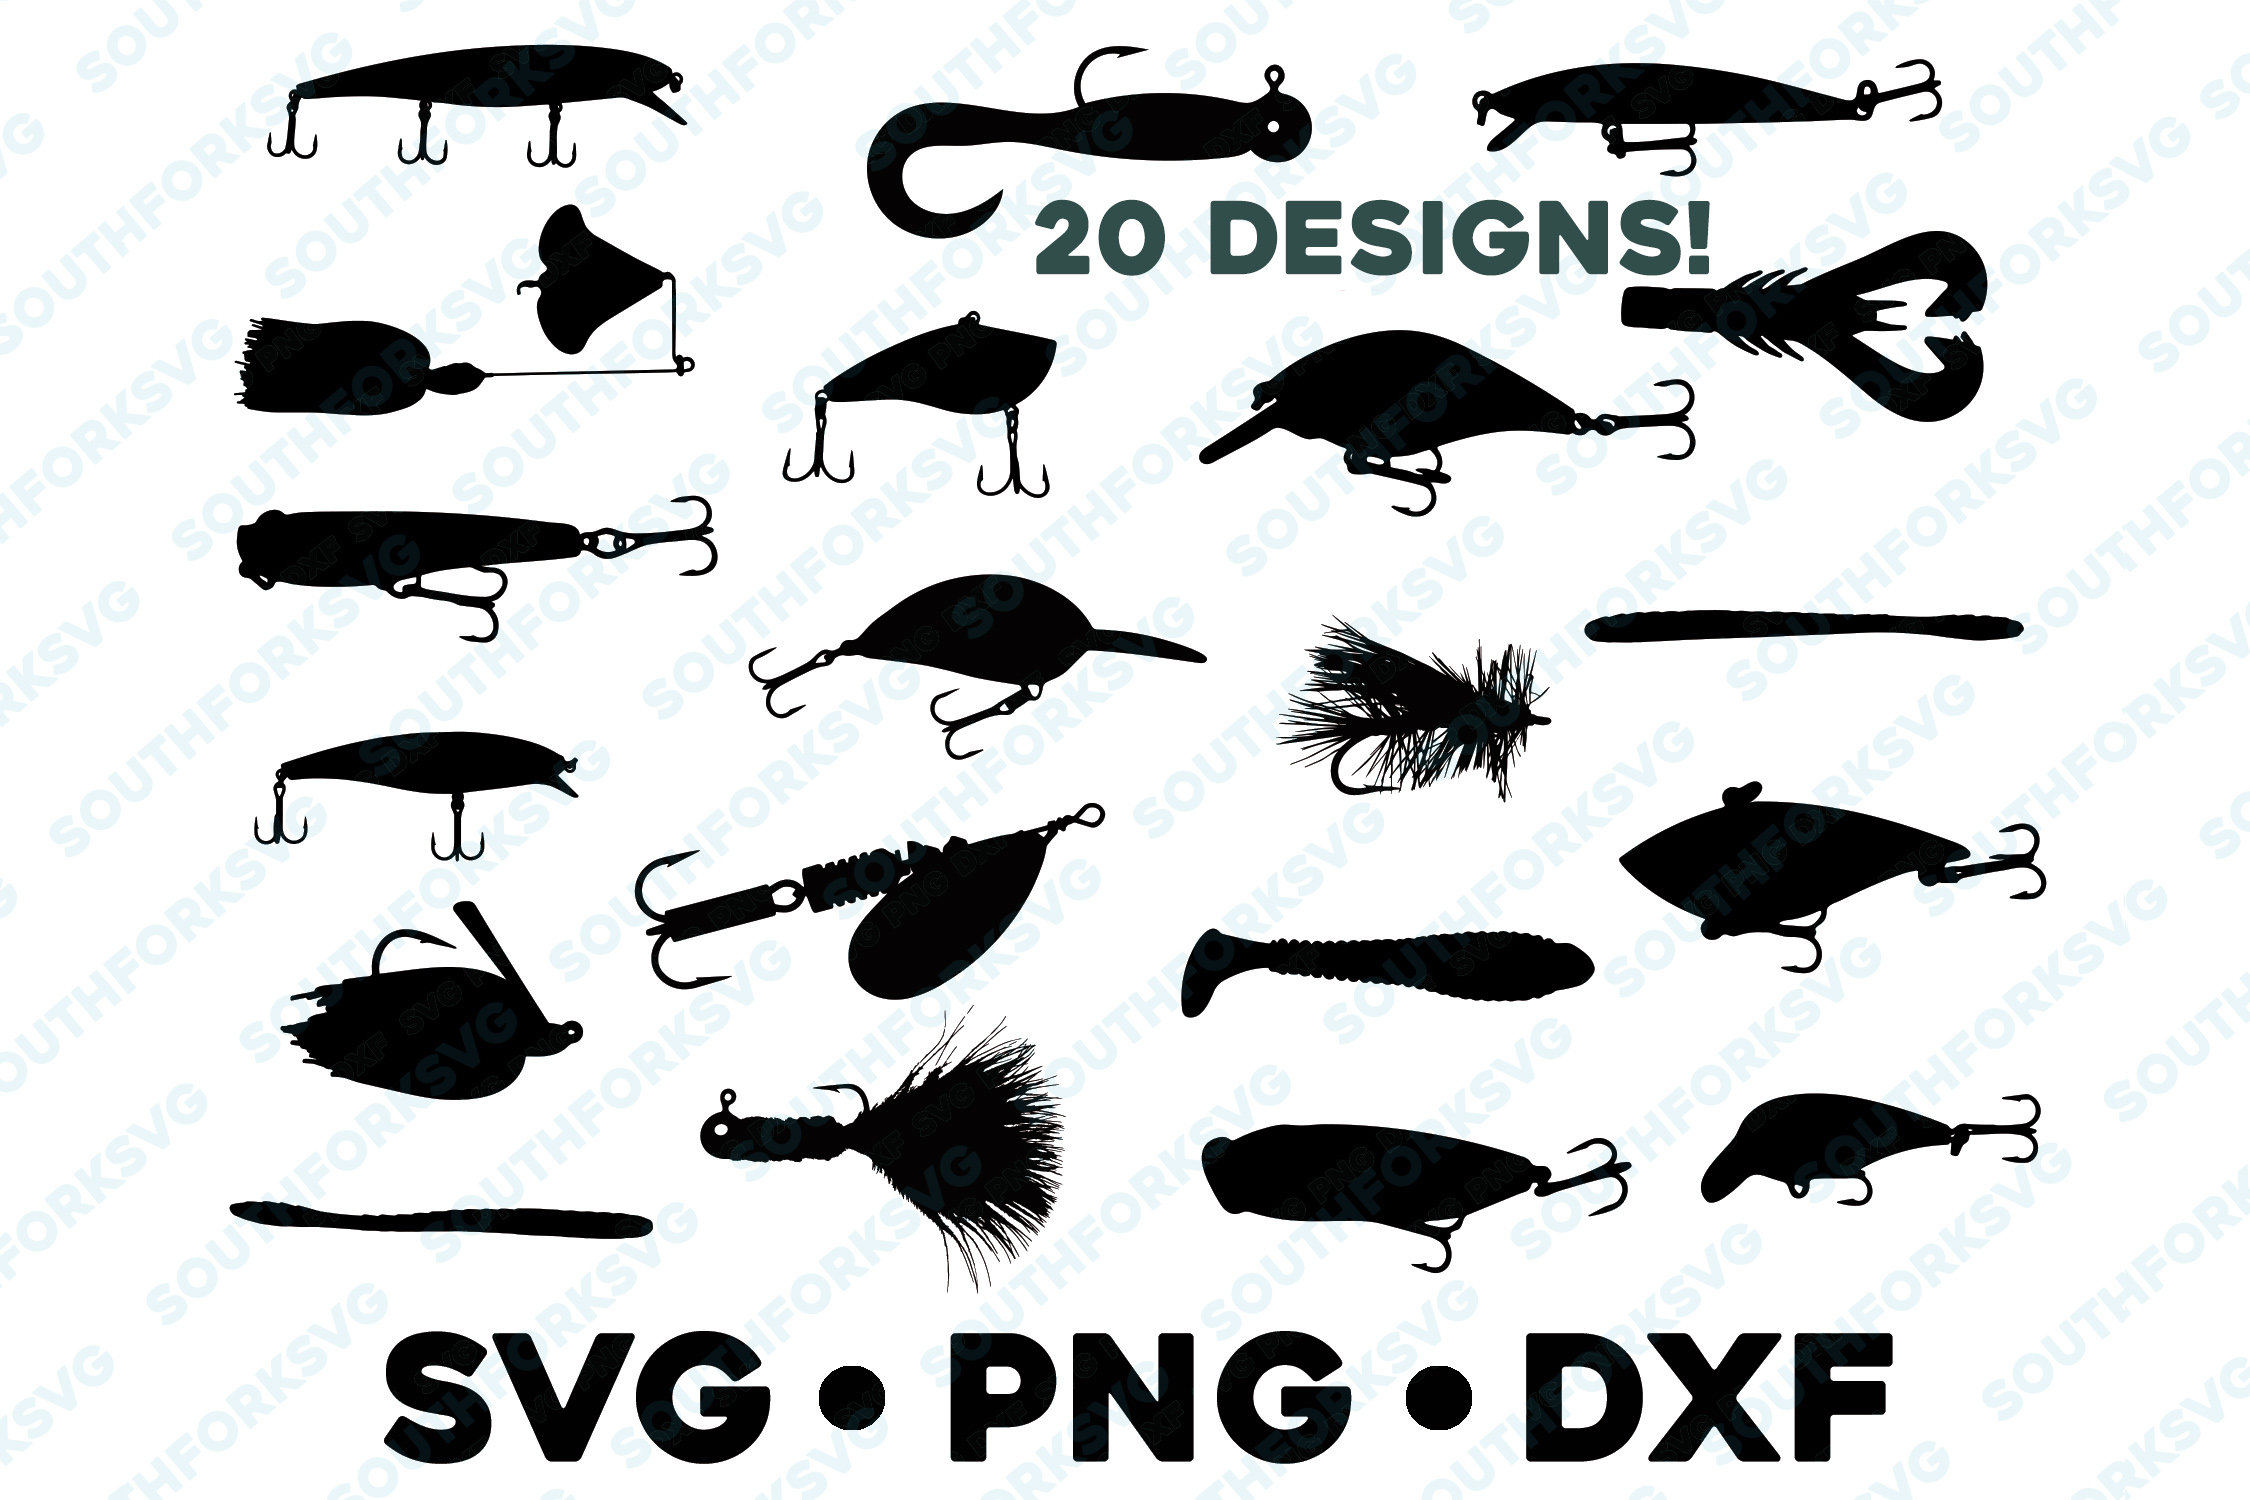 Fishing Lure Complete Bundle SVG PNG DXF Vector Transparent Cameo  Silhouette Cut Vinyl Decal Fishing Hunting Outdoors Nature Animal -  UK